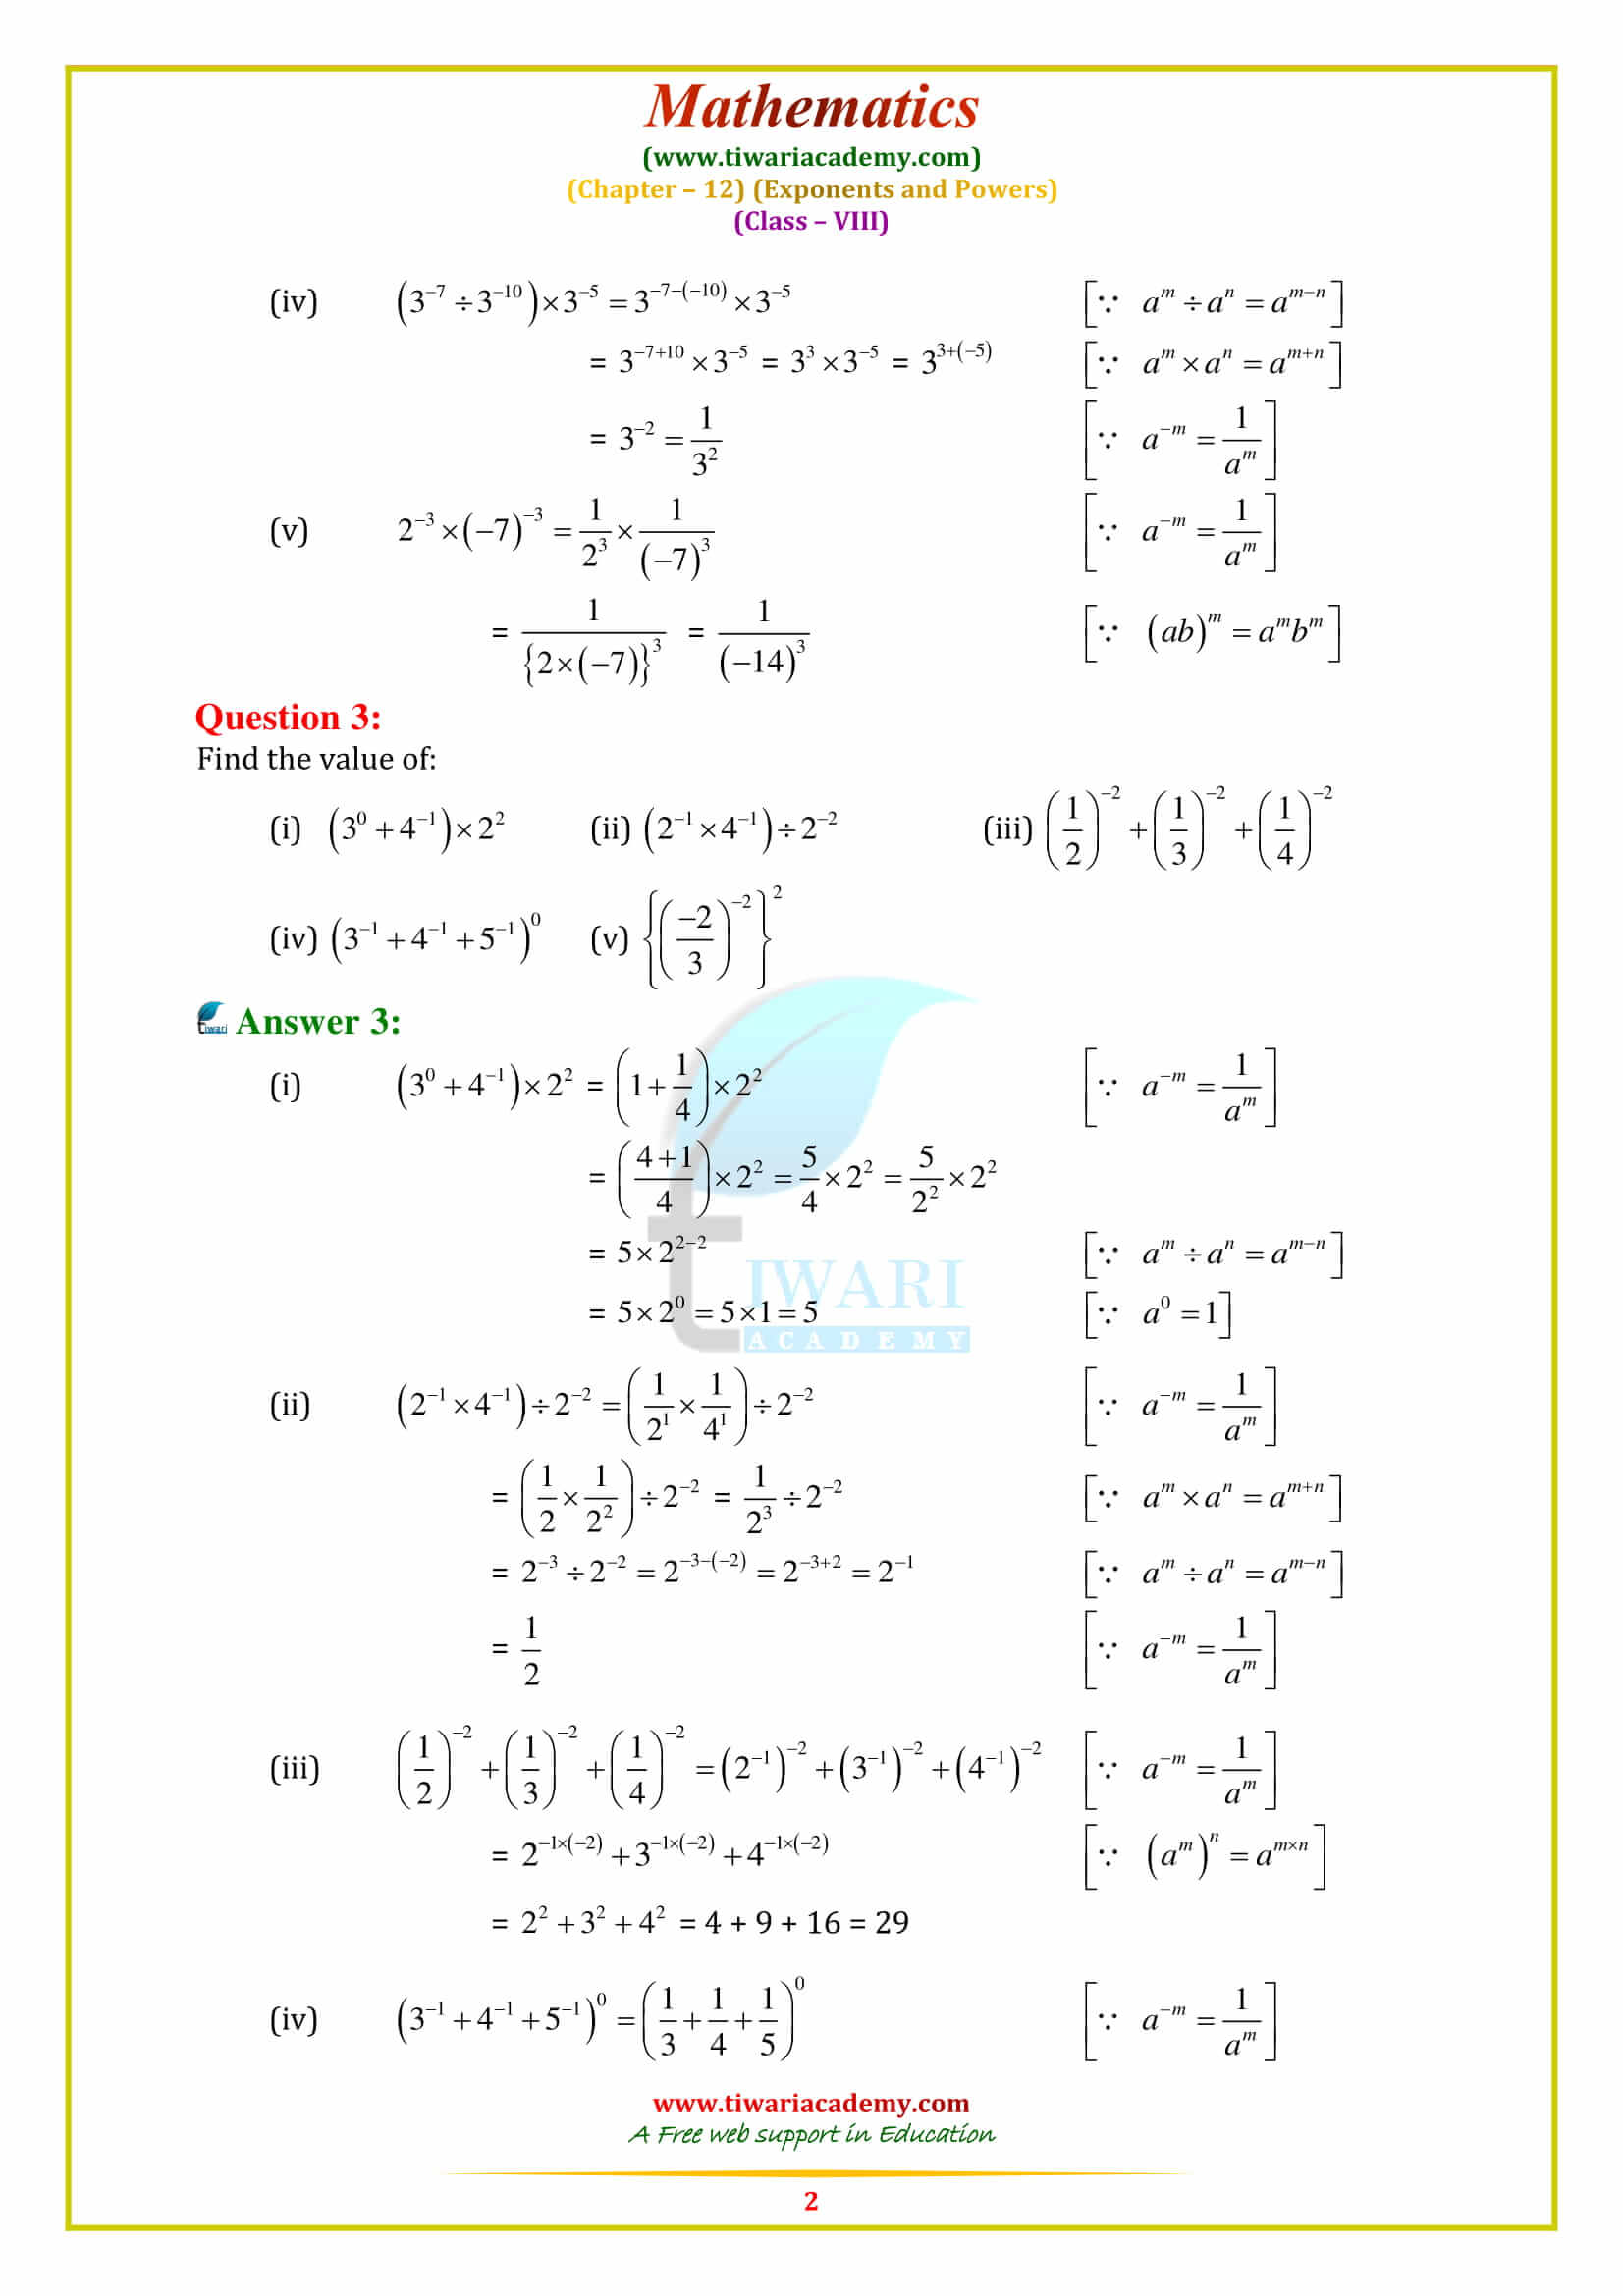 NCERT Solutions for Class 8 Maths Chapter 12 Exponents and Powers in pdf form